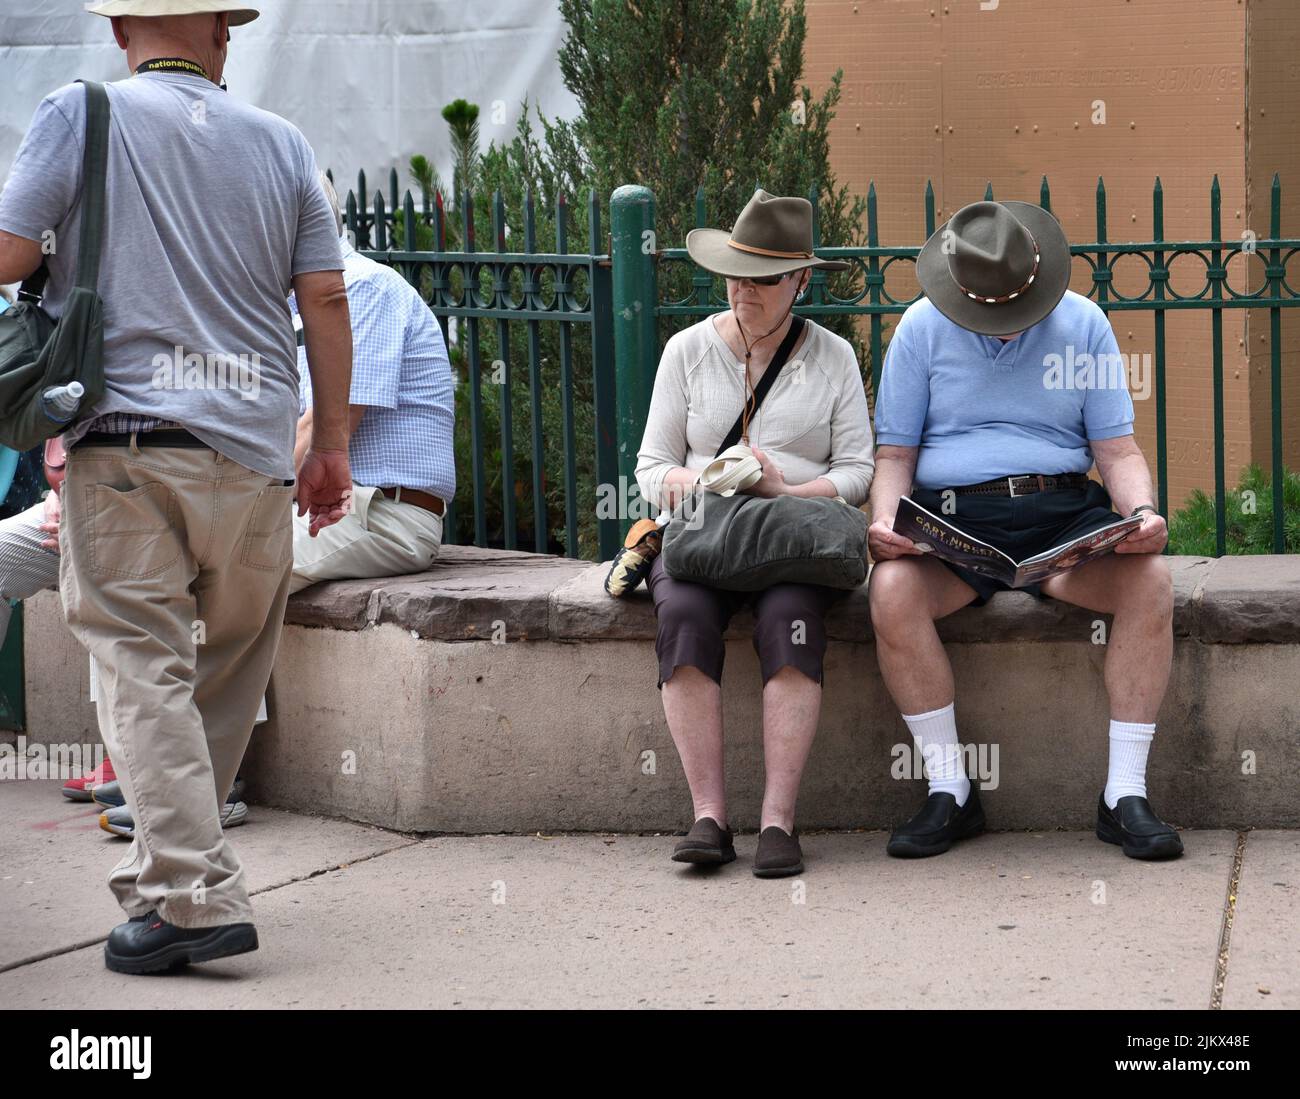 Tourists pause to rest in the historic Plaza in Santa Fe, New Mexico. Stock Photo